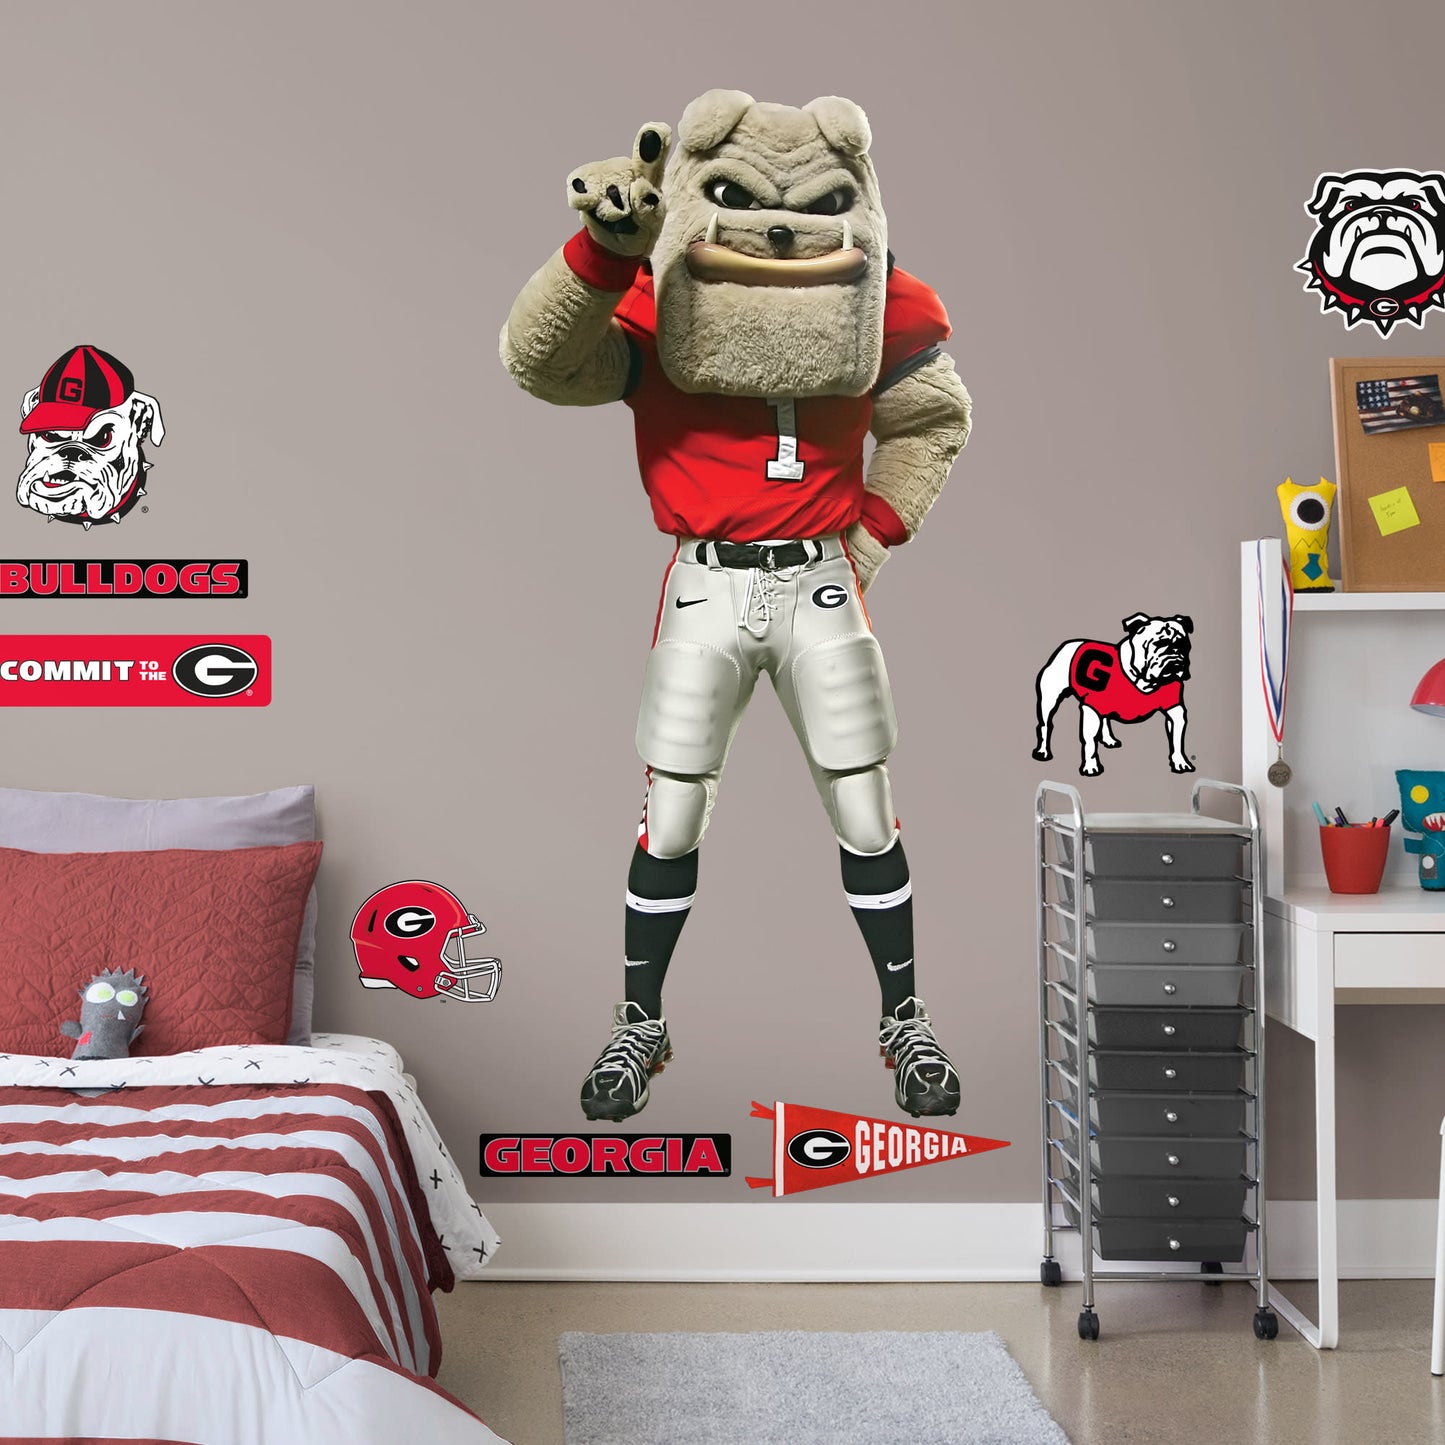 Life-Size Mascot + 11 Decals (36"W x 78"H)